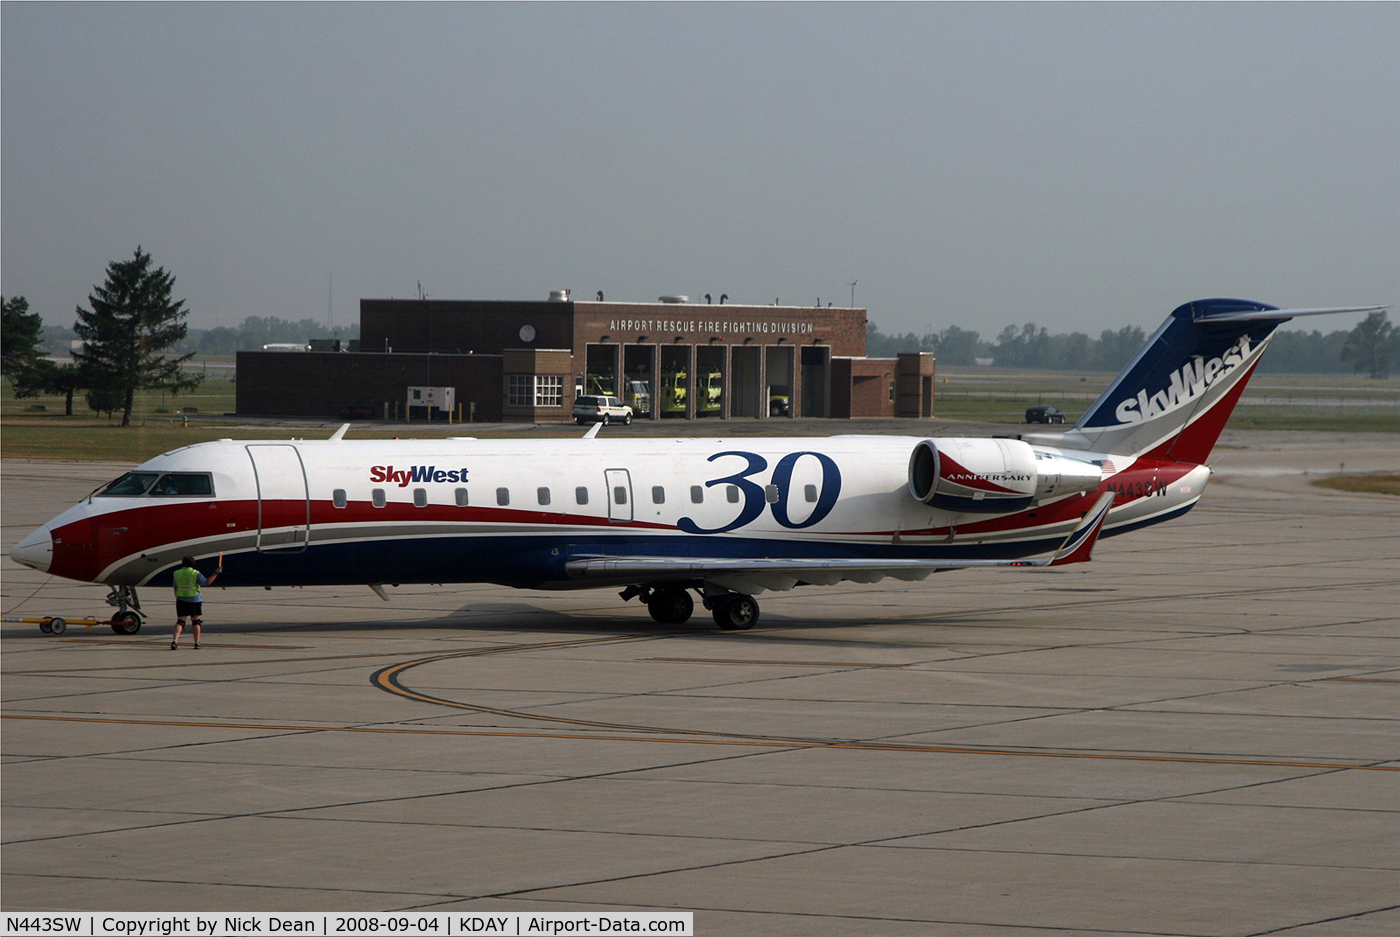 N443SW, 2002 Bombardier CRJ-200LR (CL-600-2B19) C/N 7638, Flew in this from ORD-DAY